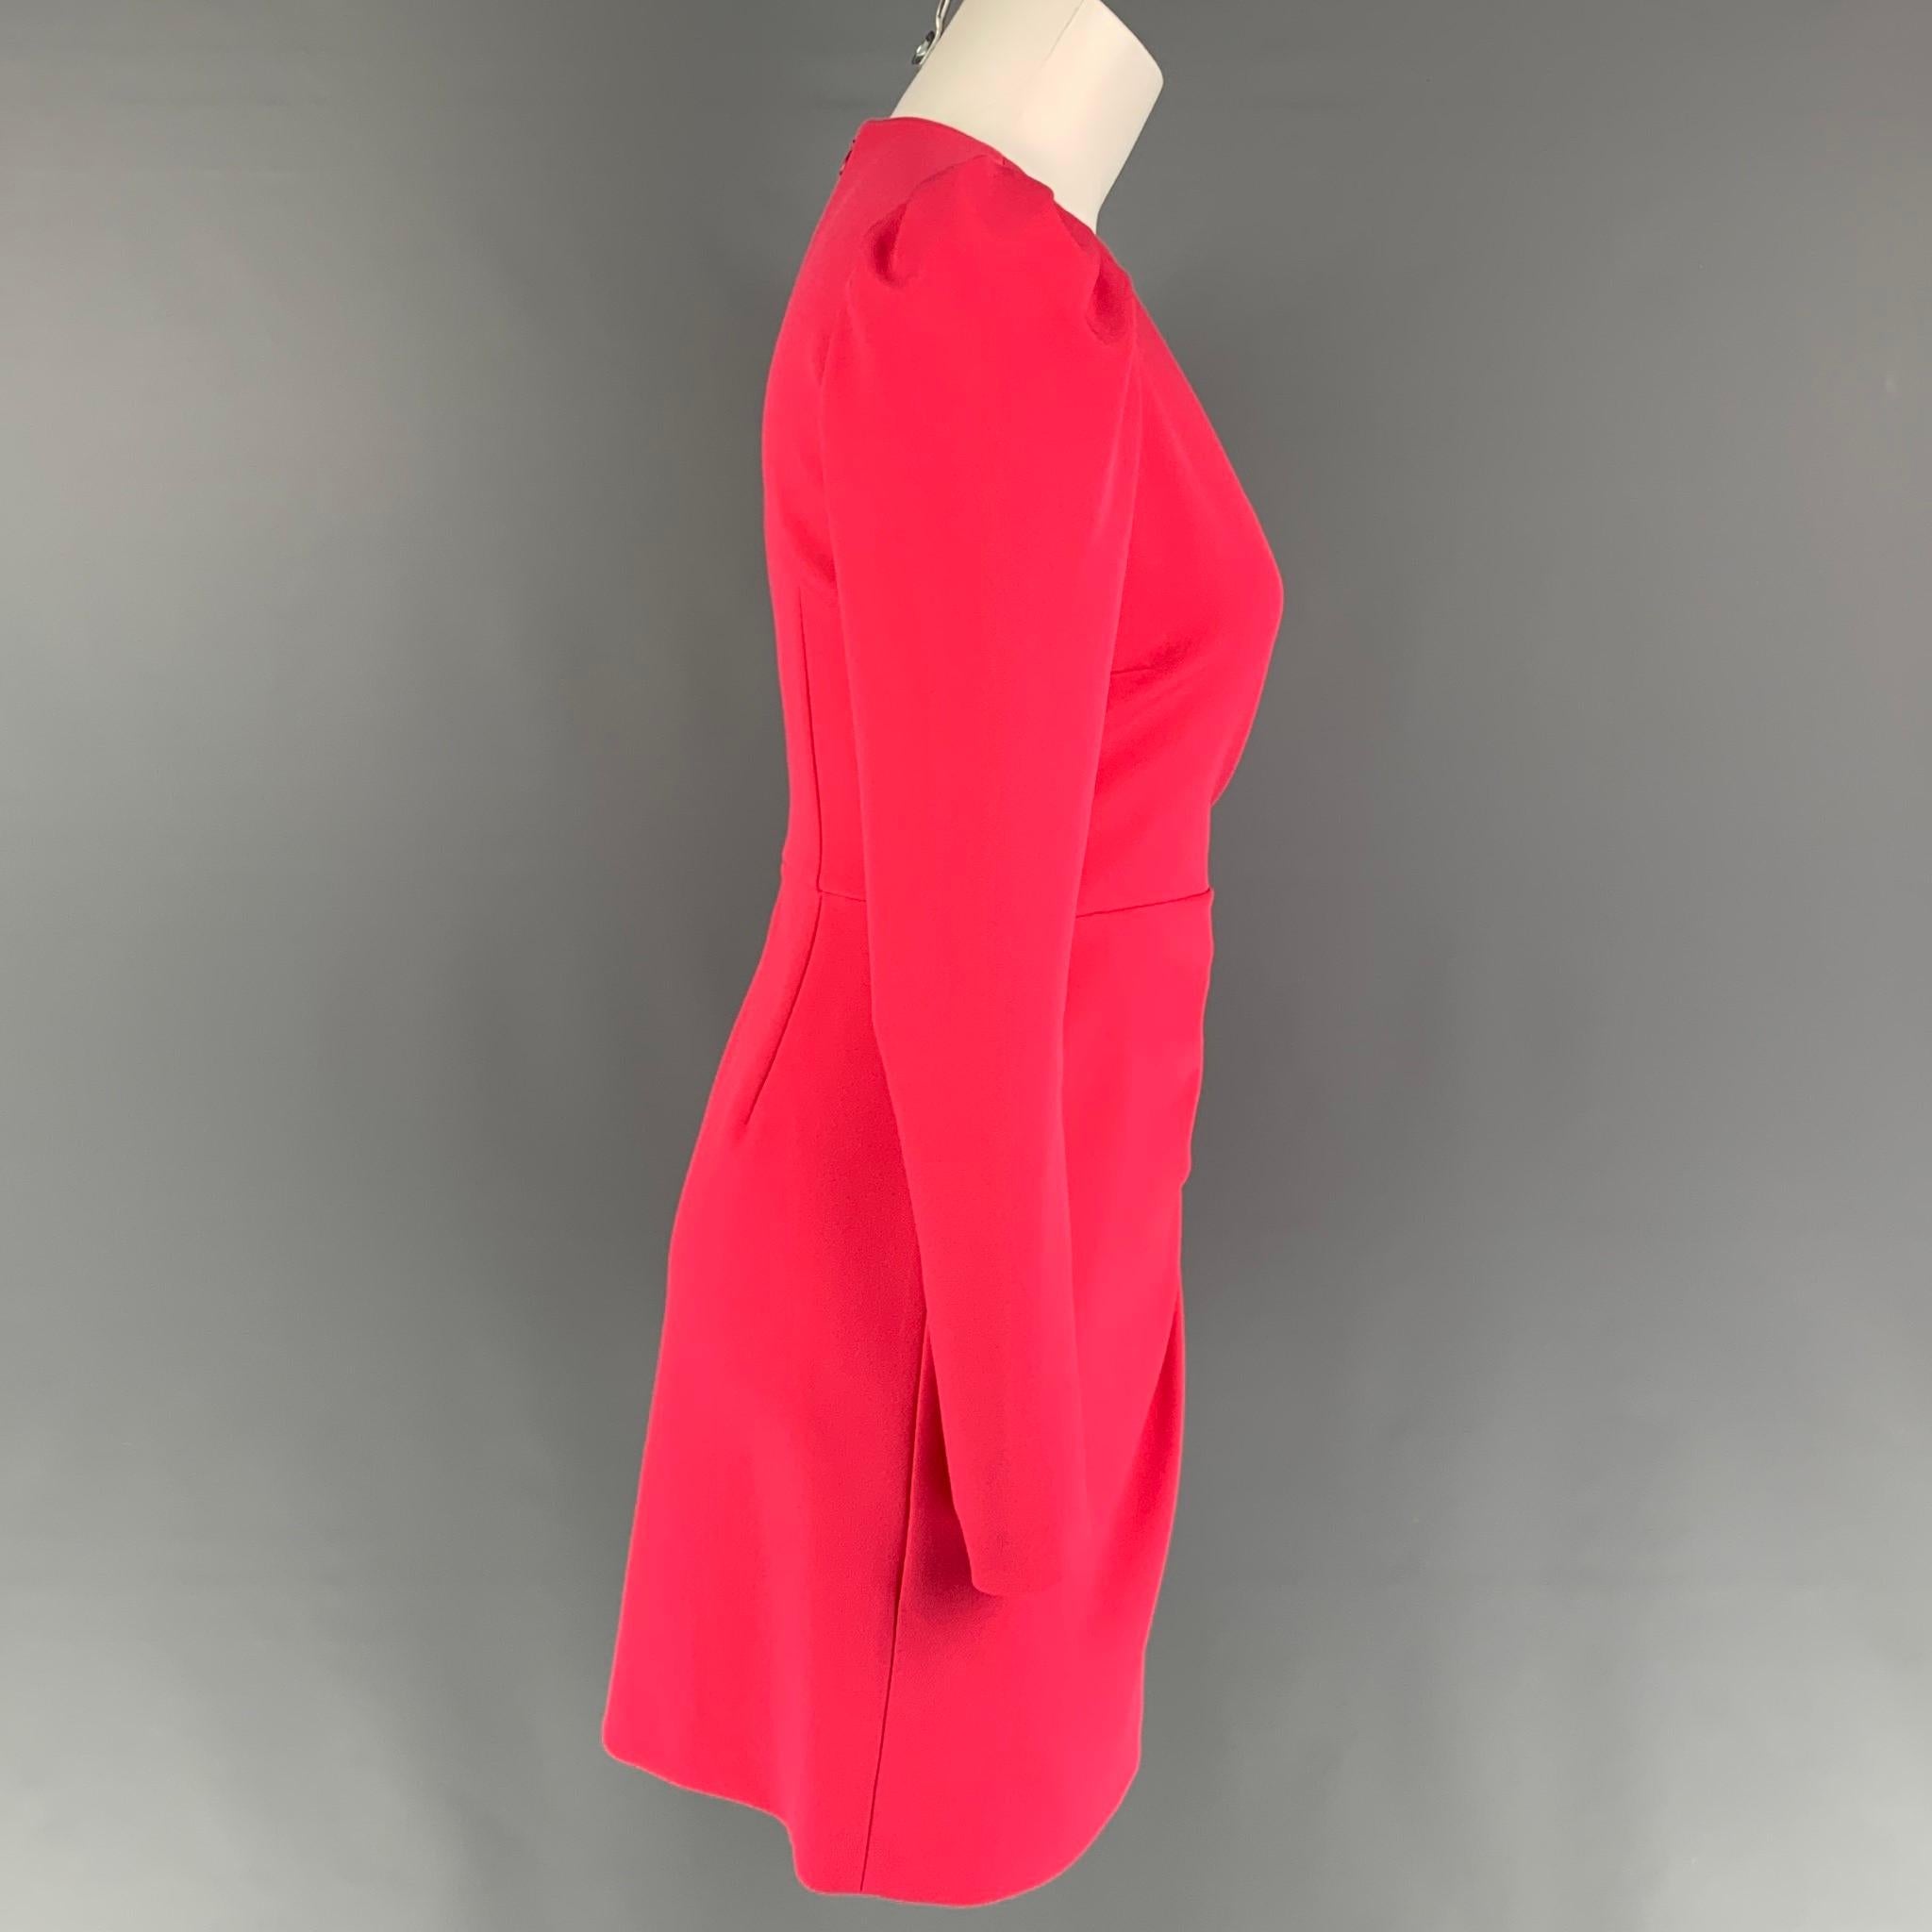 RED VALENTINO dress comes in a coral polyester featuring a wrap style, zipped sleeves, mini length, and a back zip up closure. Made in Romania. 

Very Good Pre-Owned Condition.
Marked: 38

Measurements:

Shoulder: 13 in.
Bust: 34 in.
Waist: 26